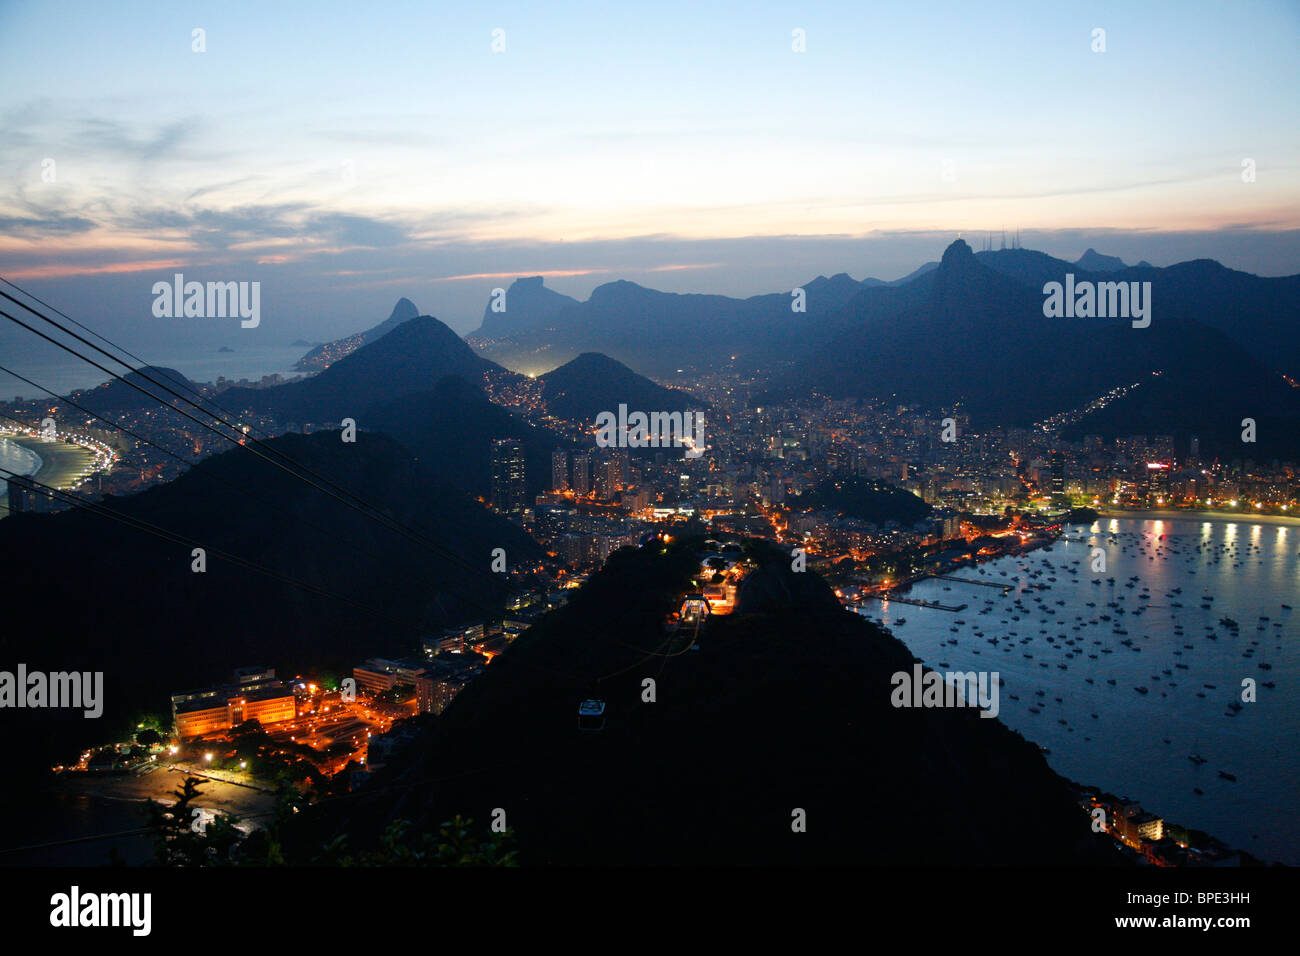 View over Rio de Janeiro seen from the top of the Sugar Loaf Mountain, Brazil. Stock Photo